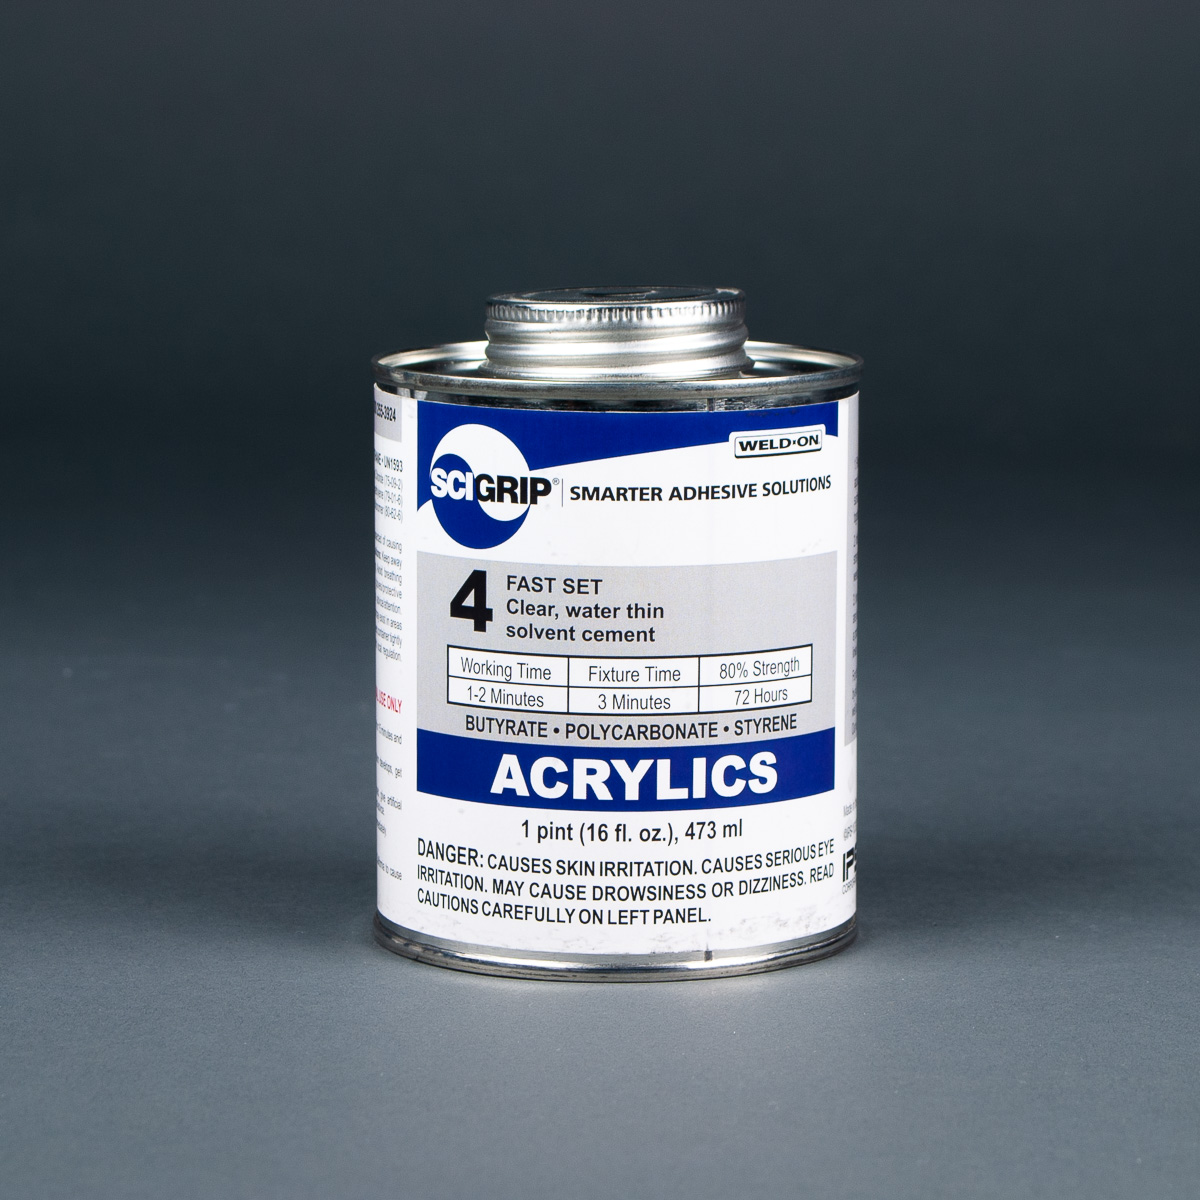 SCIGRIP Weld-On 4 Acrylic Solvent Cement 1 pint